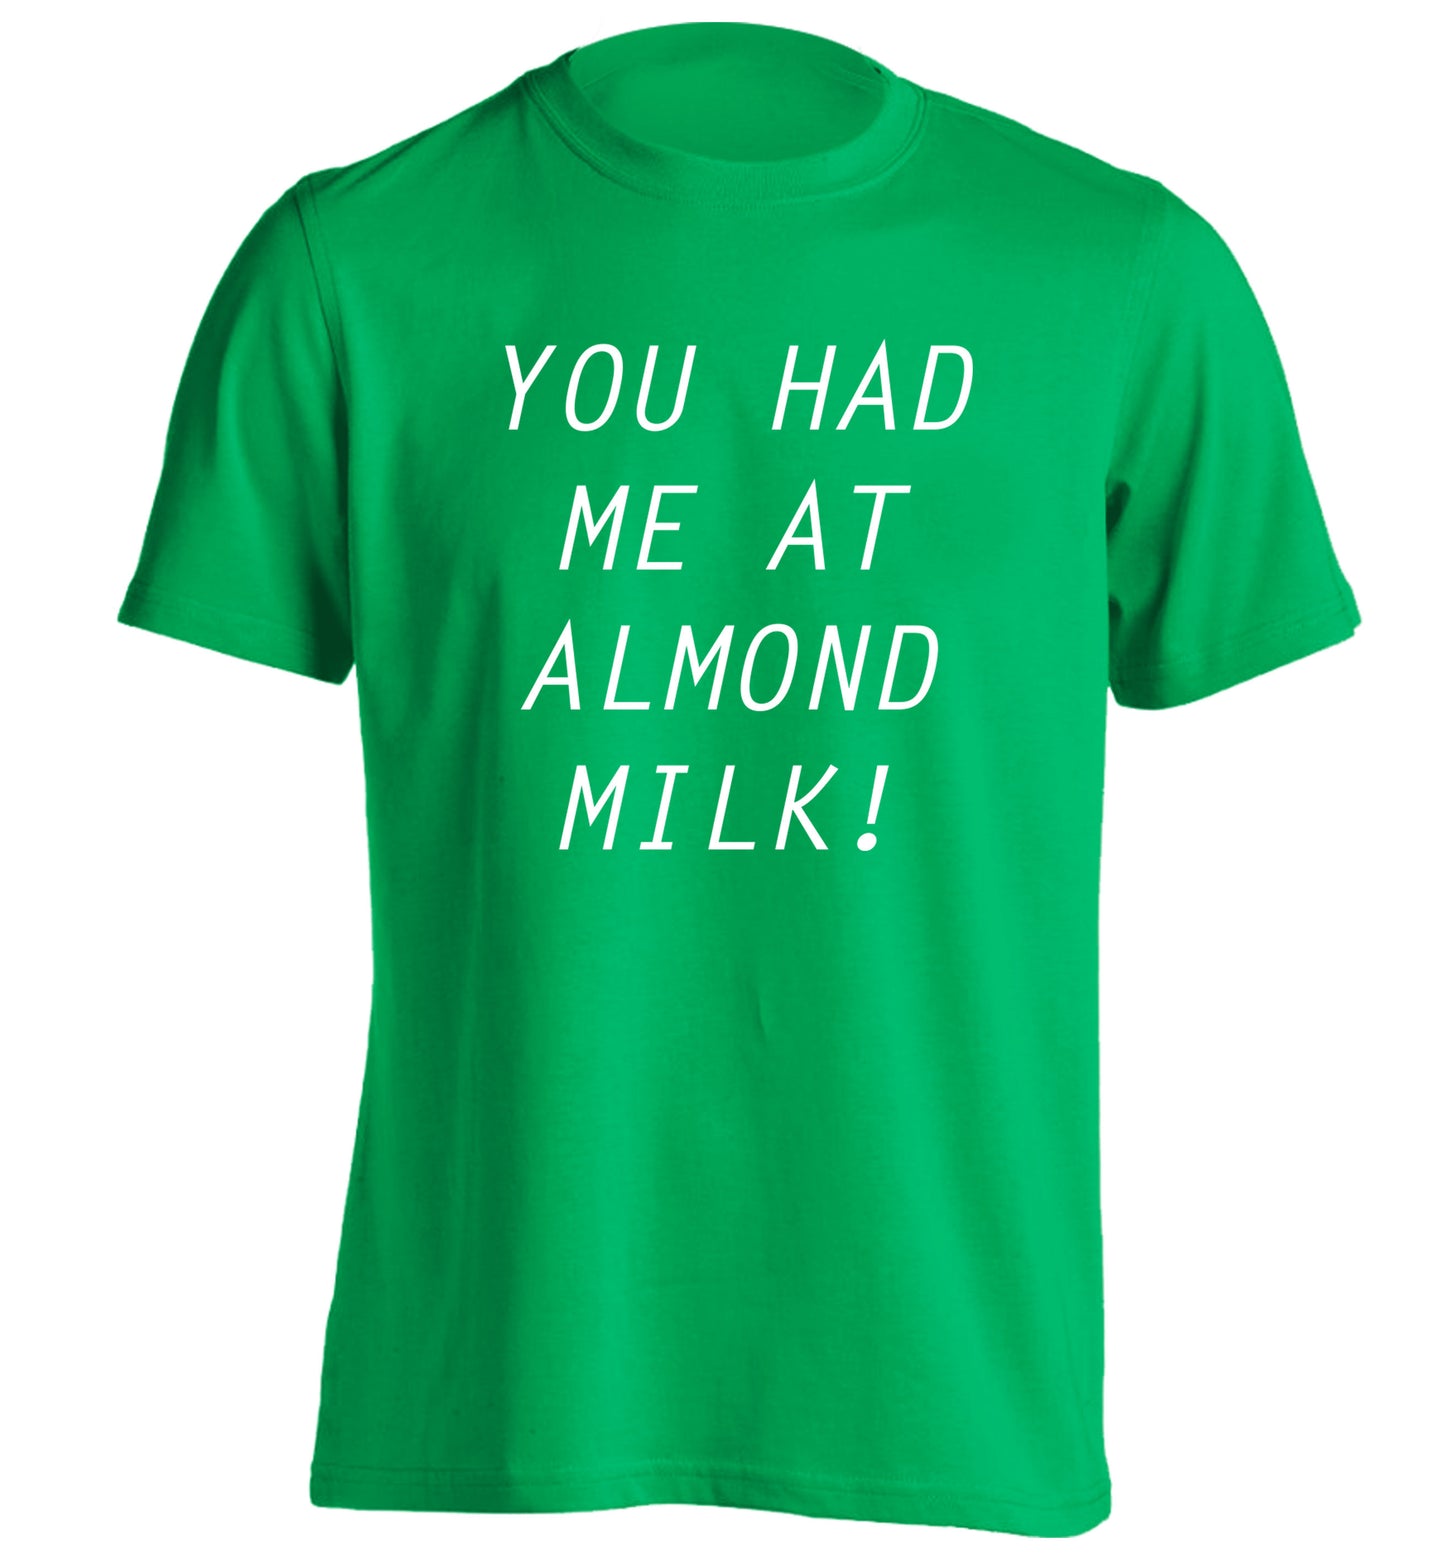 You had me at almond milk adults unisex green Tshirt 2XL